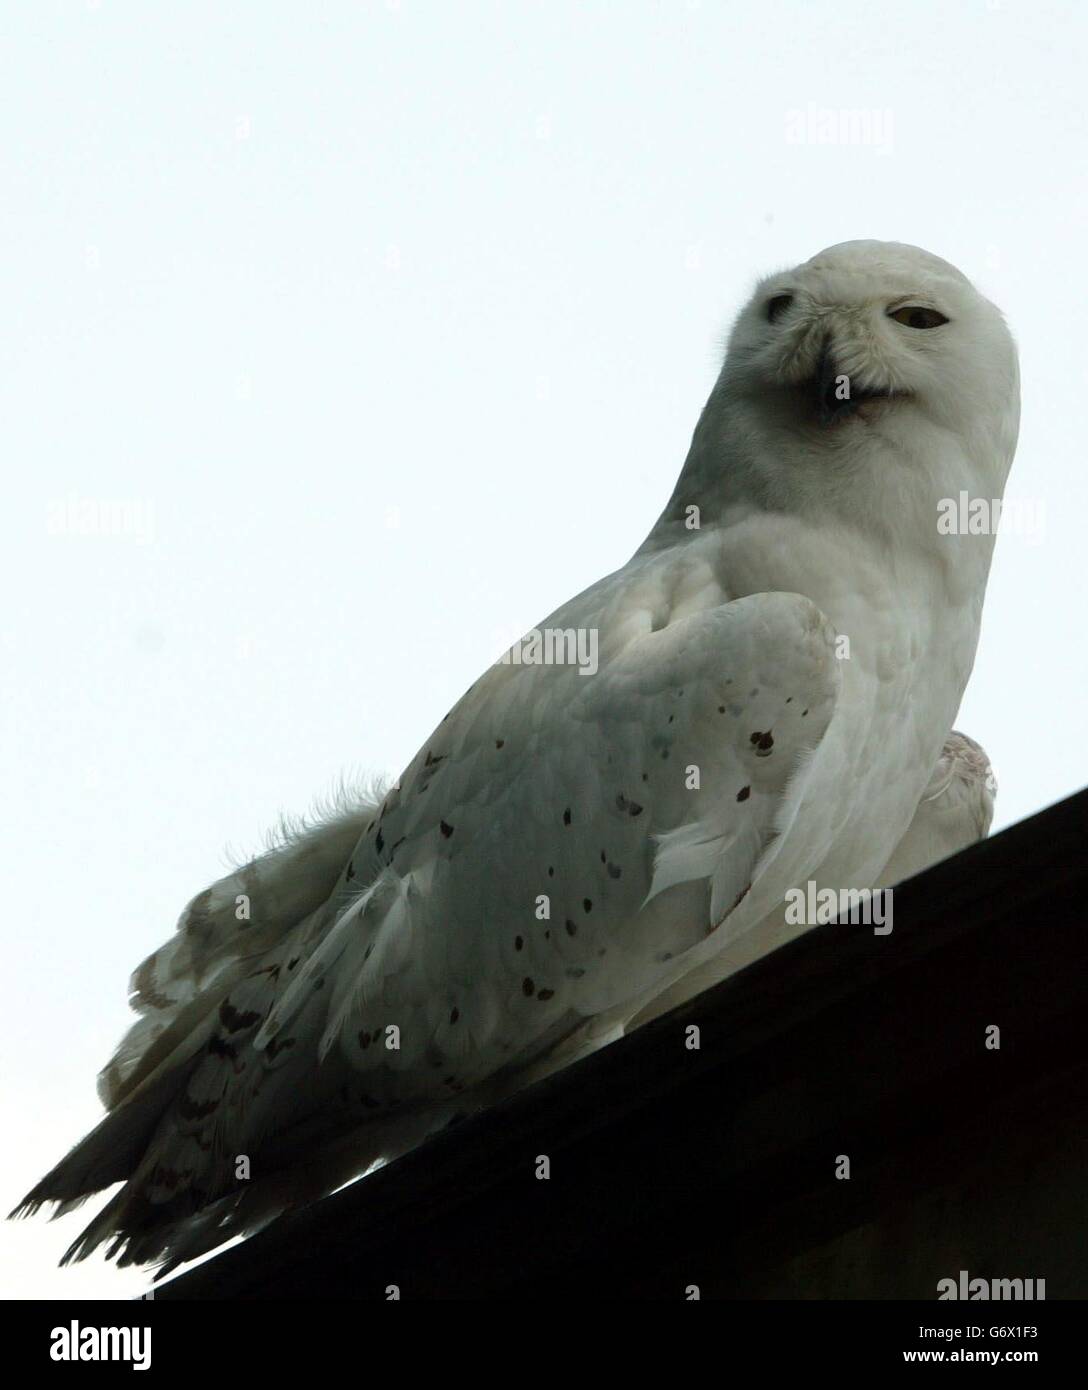 A Snowy Owl sits in a field in Dunwich,Suffolk. Five-year-old Fetlar, who stands 20 inches and has a 4ft 6inch wing span, is roosting in trees at Dunwich, Suffolk, after flying away from the Suffolk Owl Sanctuary at Stonham Aspal, Suffolk, late last month. Stock Photo